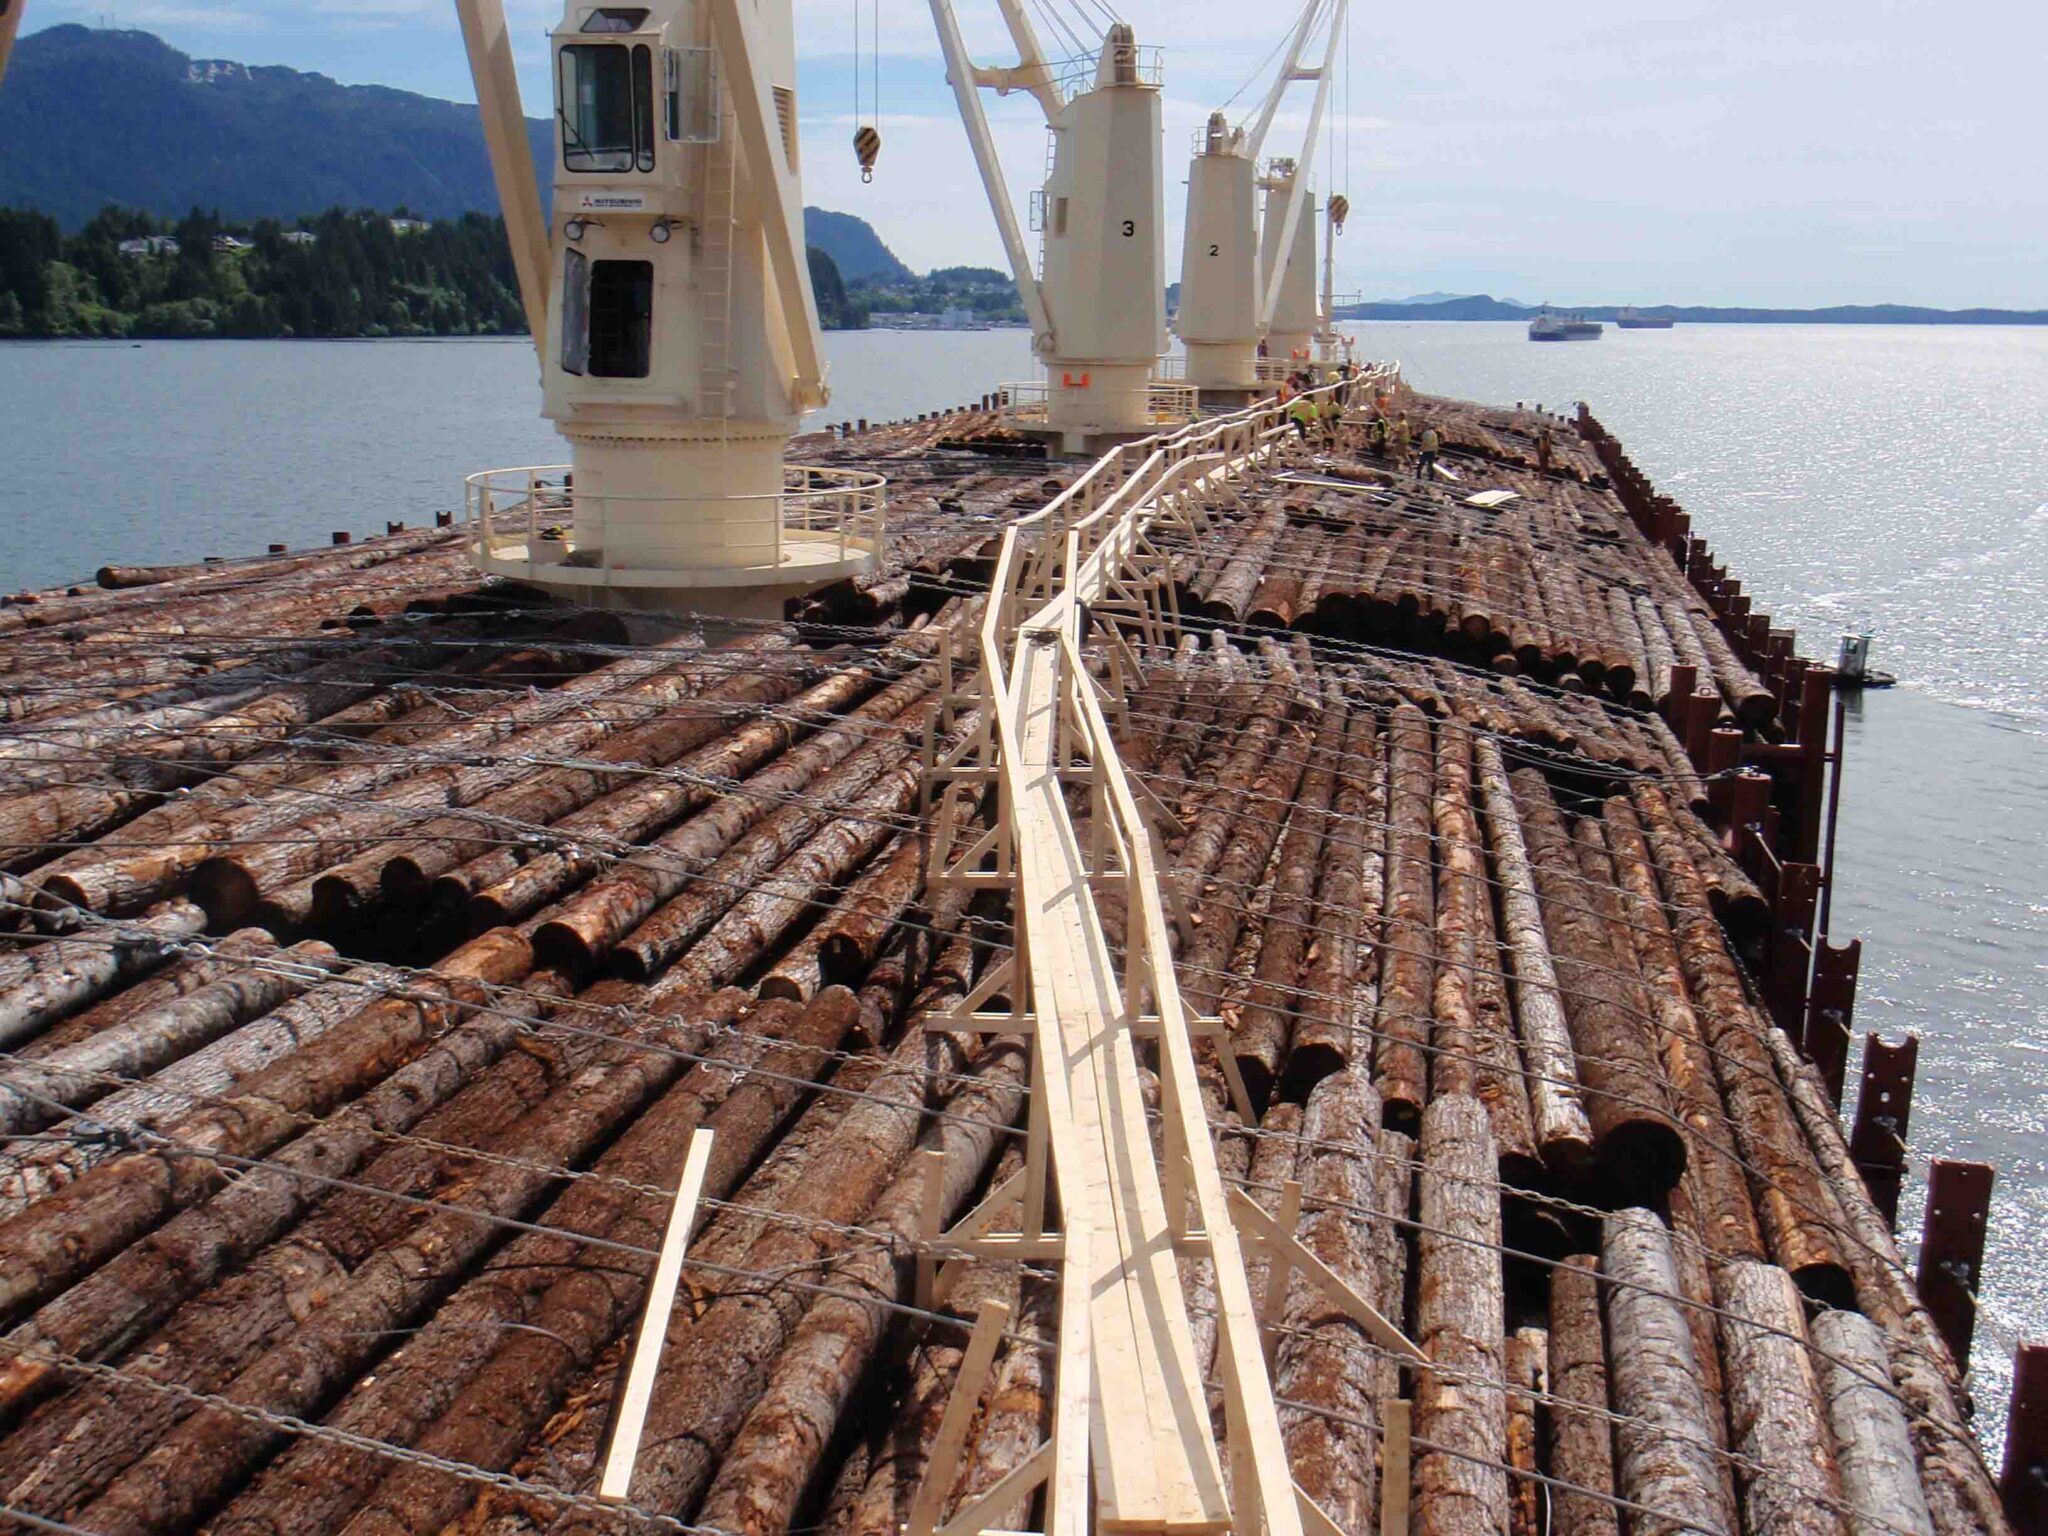 Logs securely stowed with chains and wires on top of a Lumber Carrier.